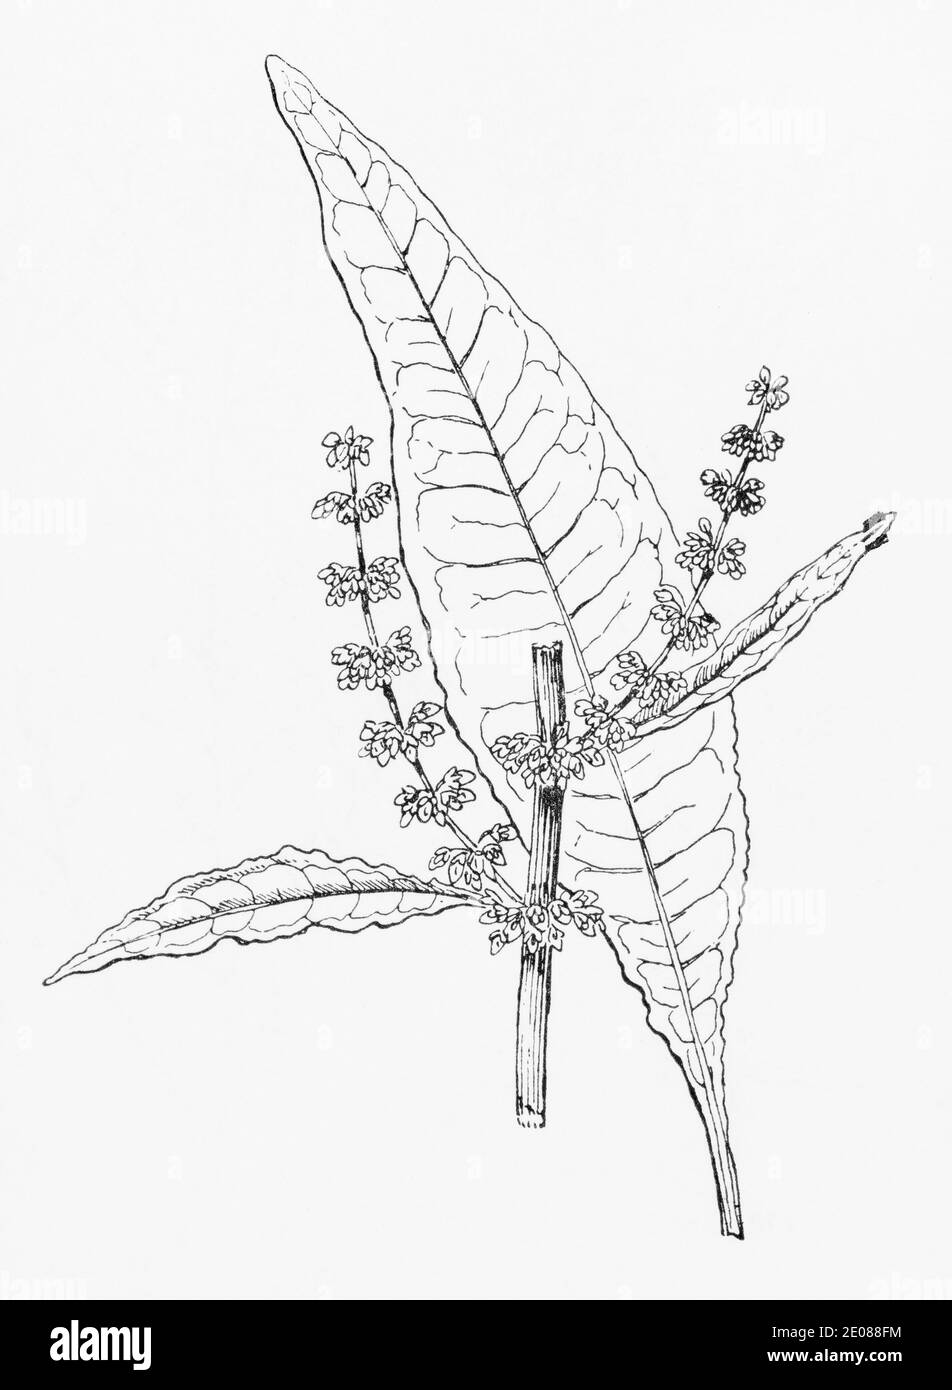 Old botanical illustration engraving of Water Dock / Rumex hydrolapathum. Traditional medicinal herbal plant.  See Notes Stock Photo